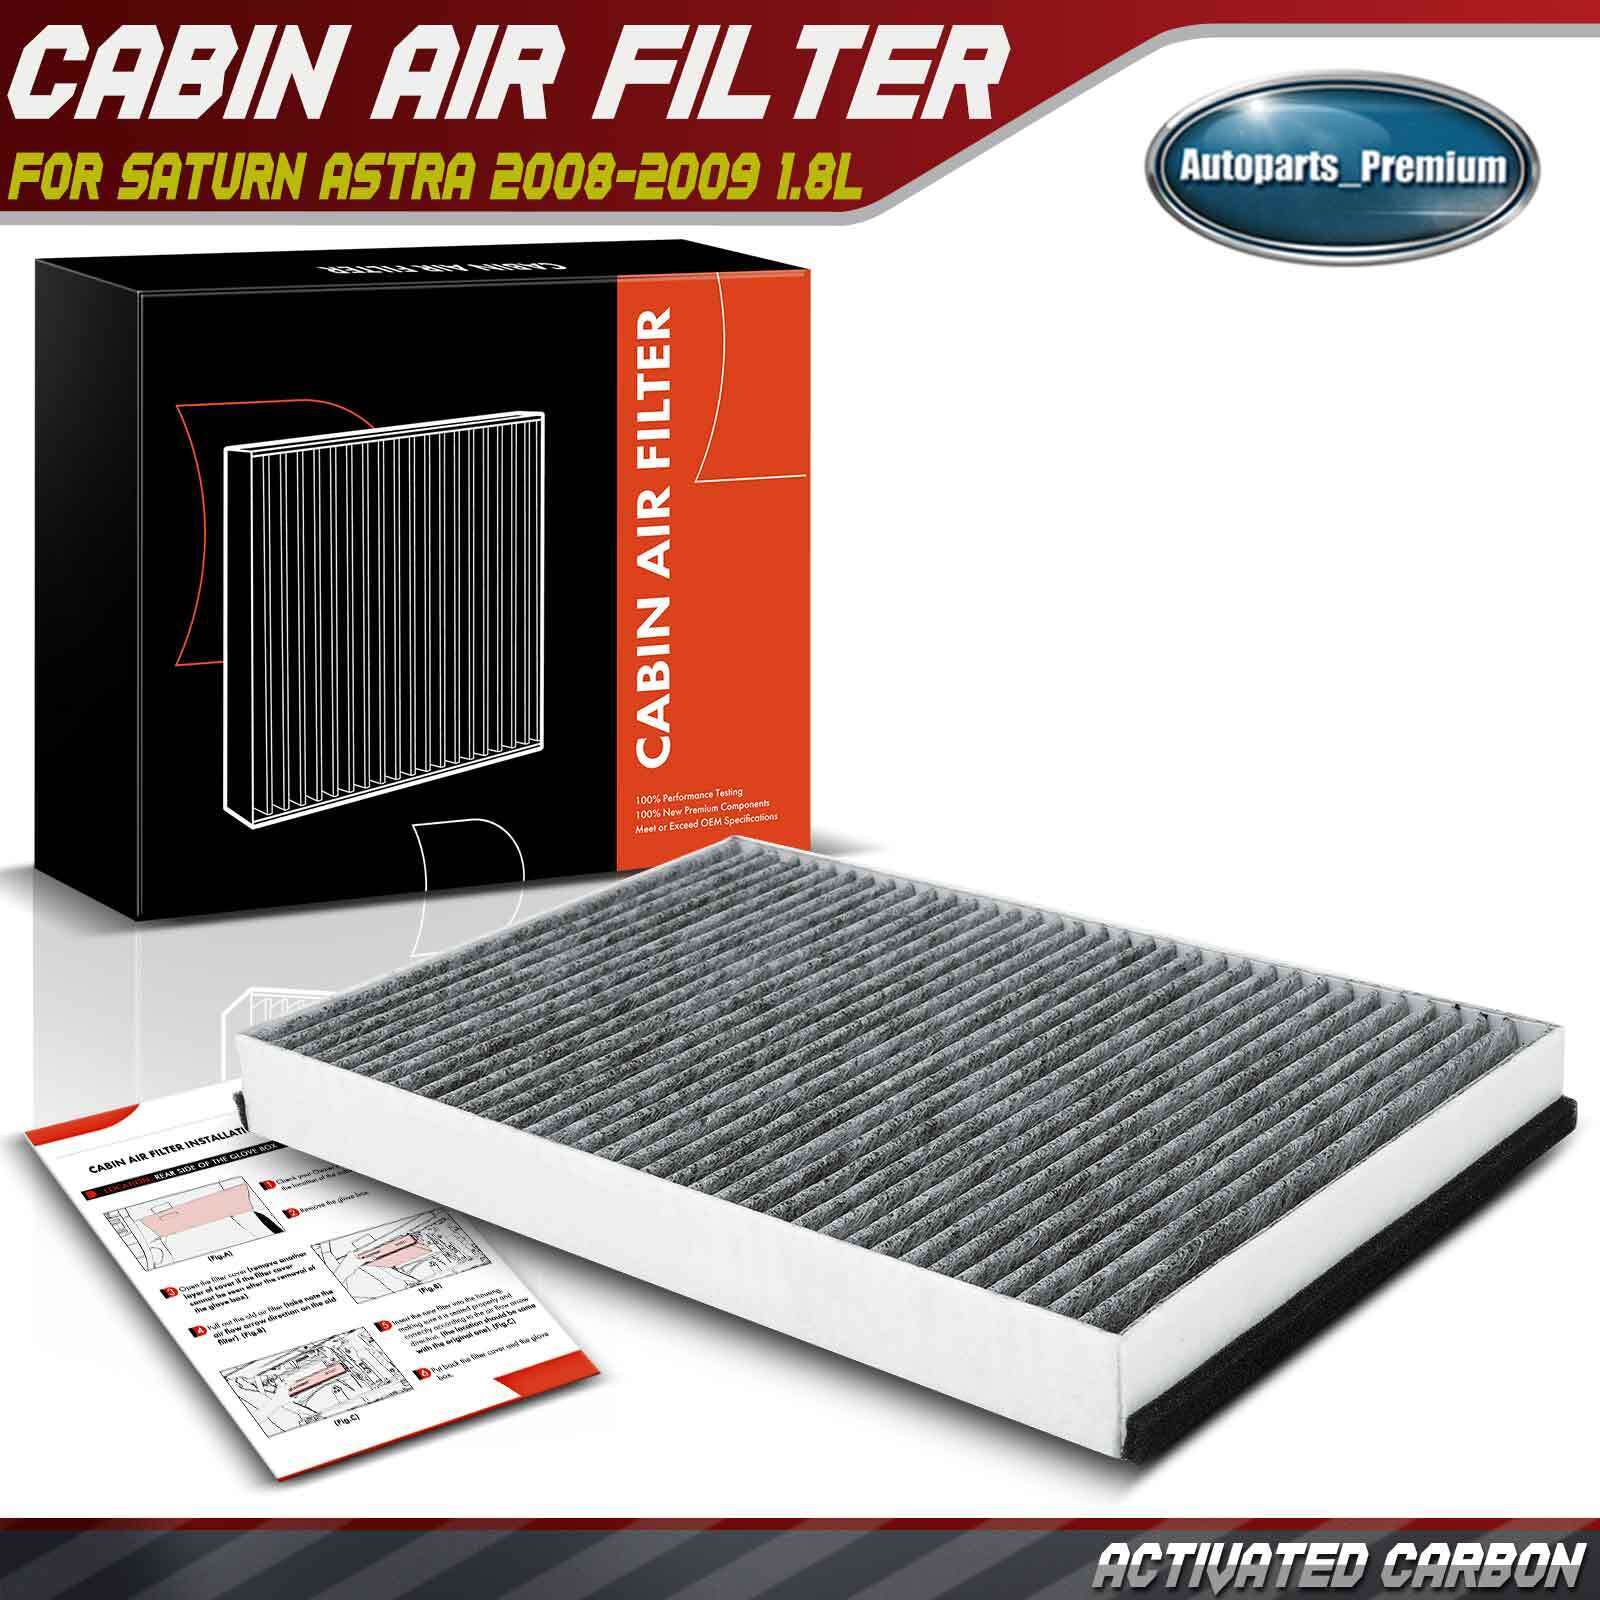 1x New Front Activated Carbon Cabin Air Filter for Saturn Astra 2008-2009 1.8L